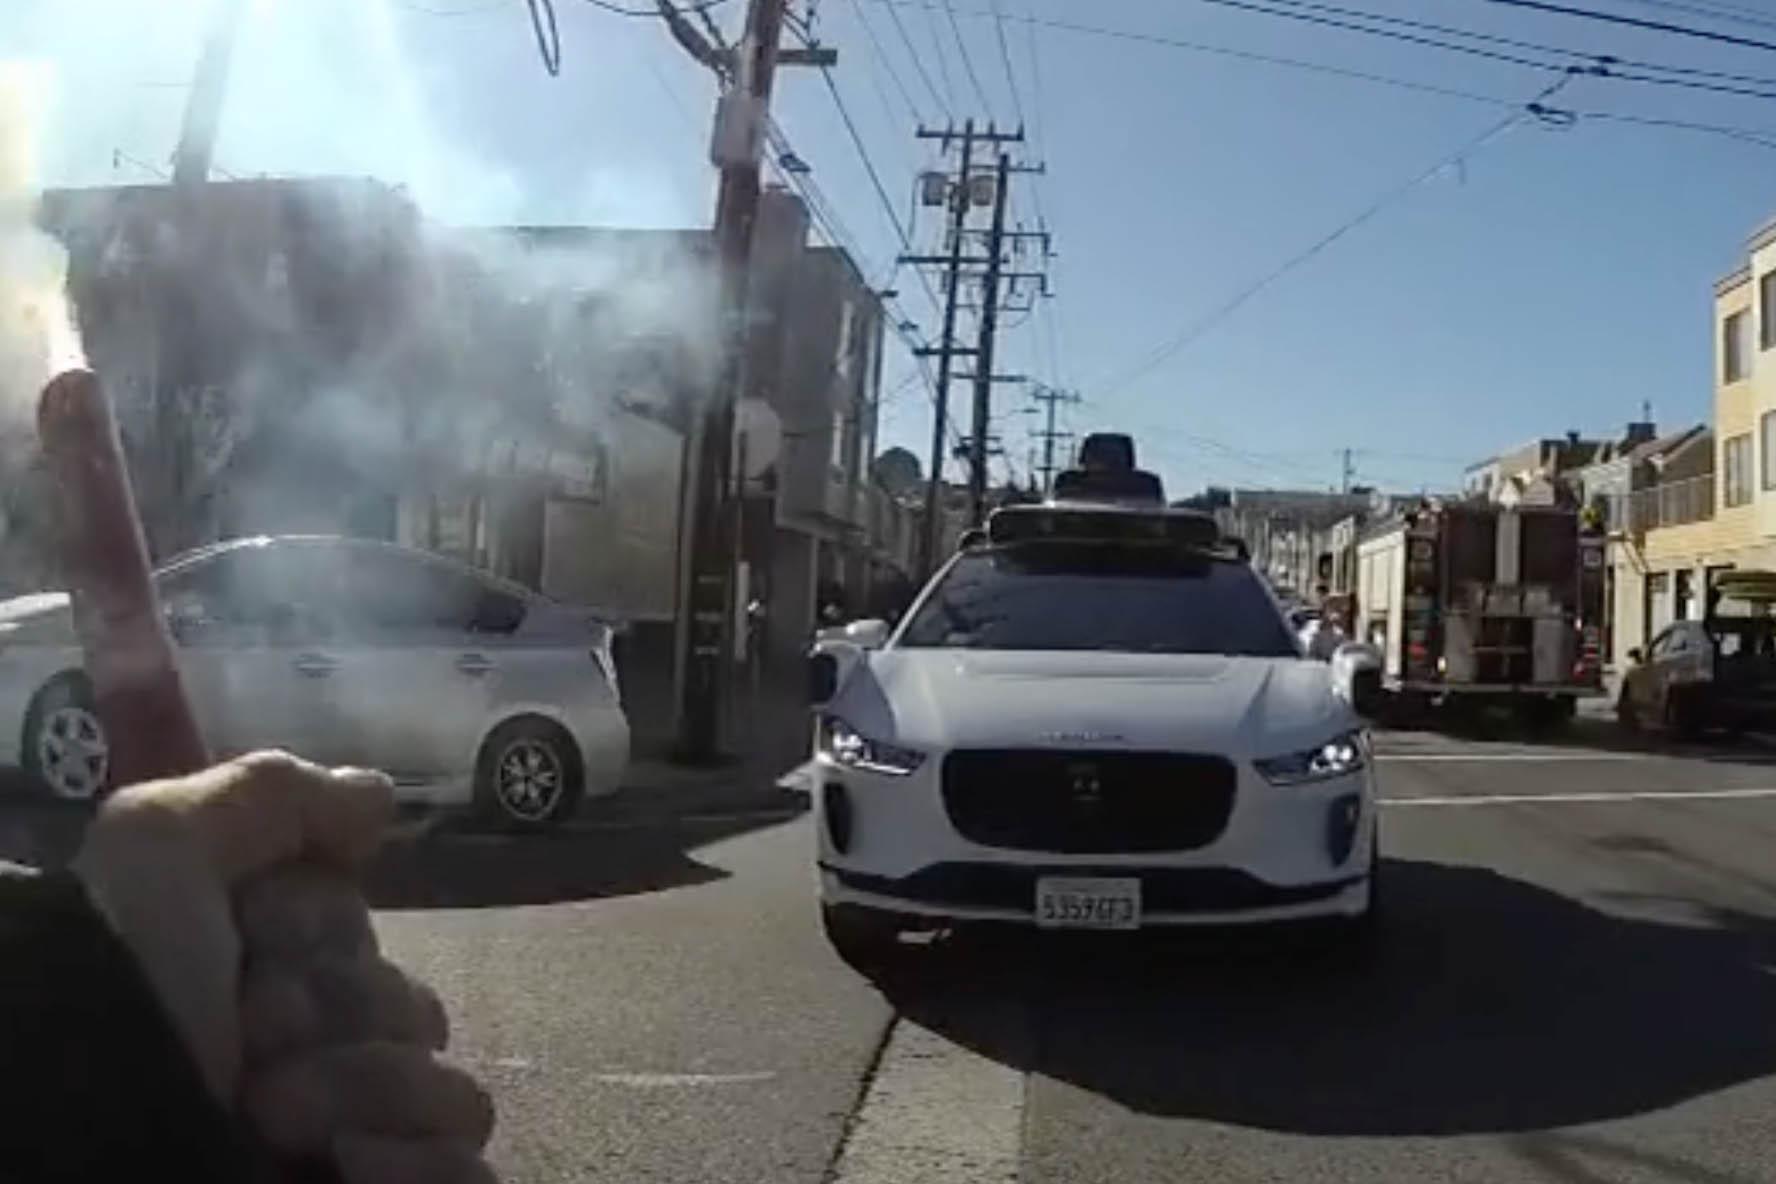 Watch police scream at a driverless car to make it stop | CarExpert